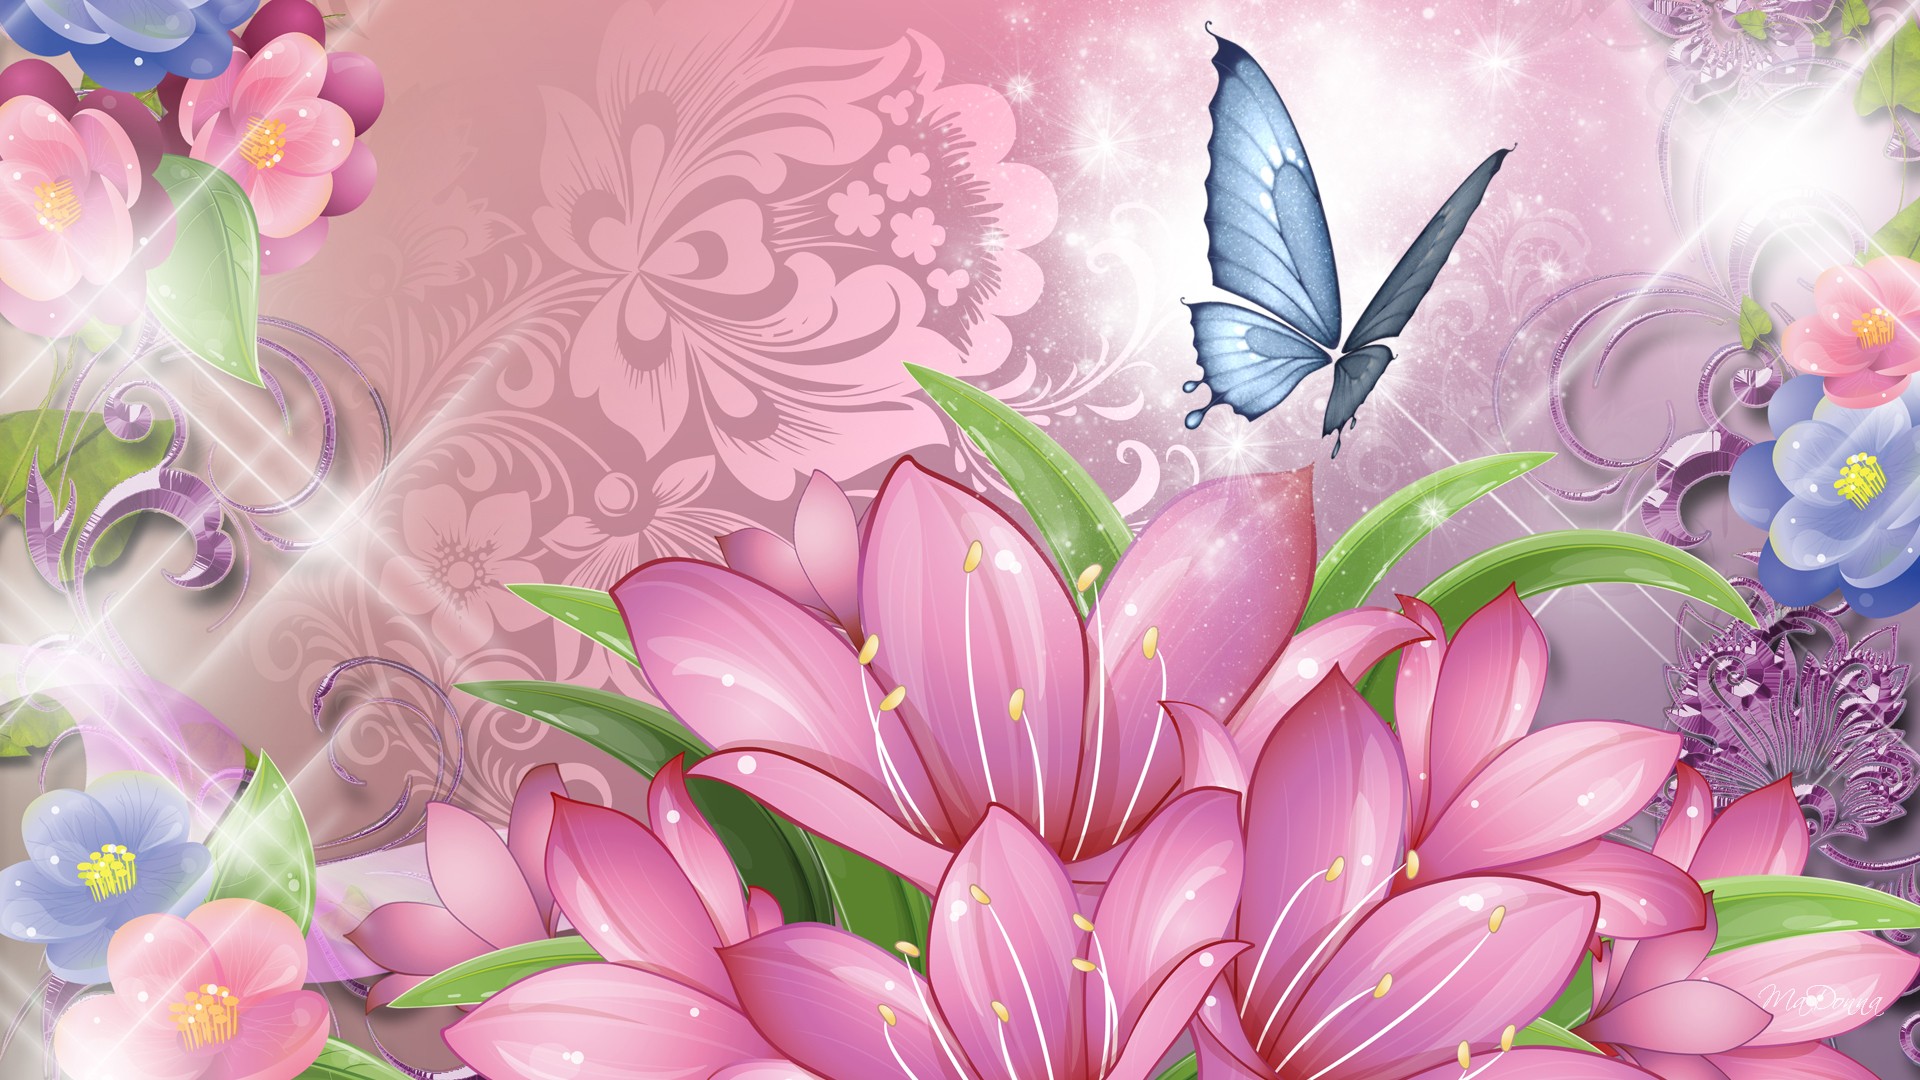 Yellow Flowers And Butterflies Wallpapers